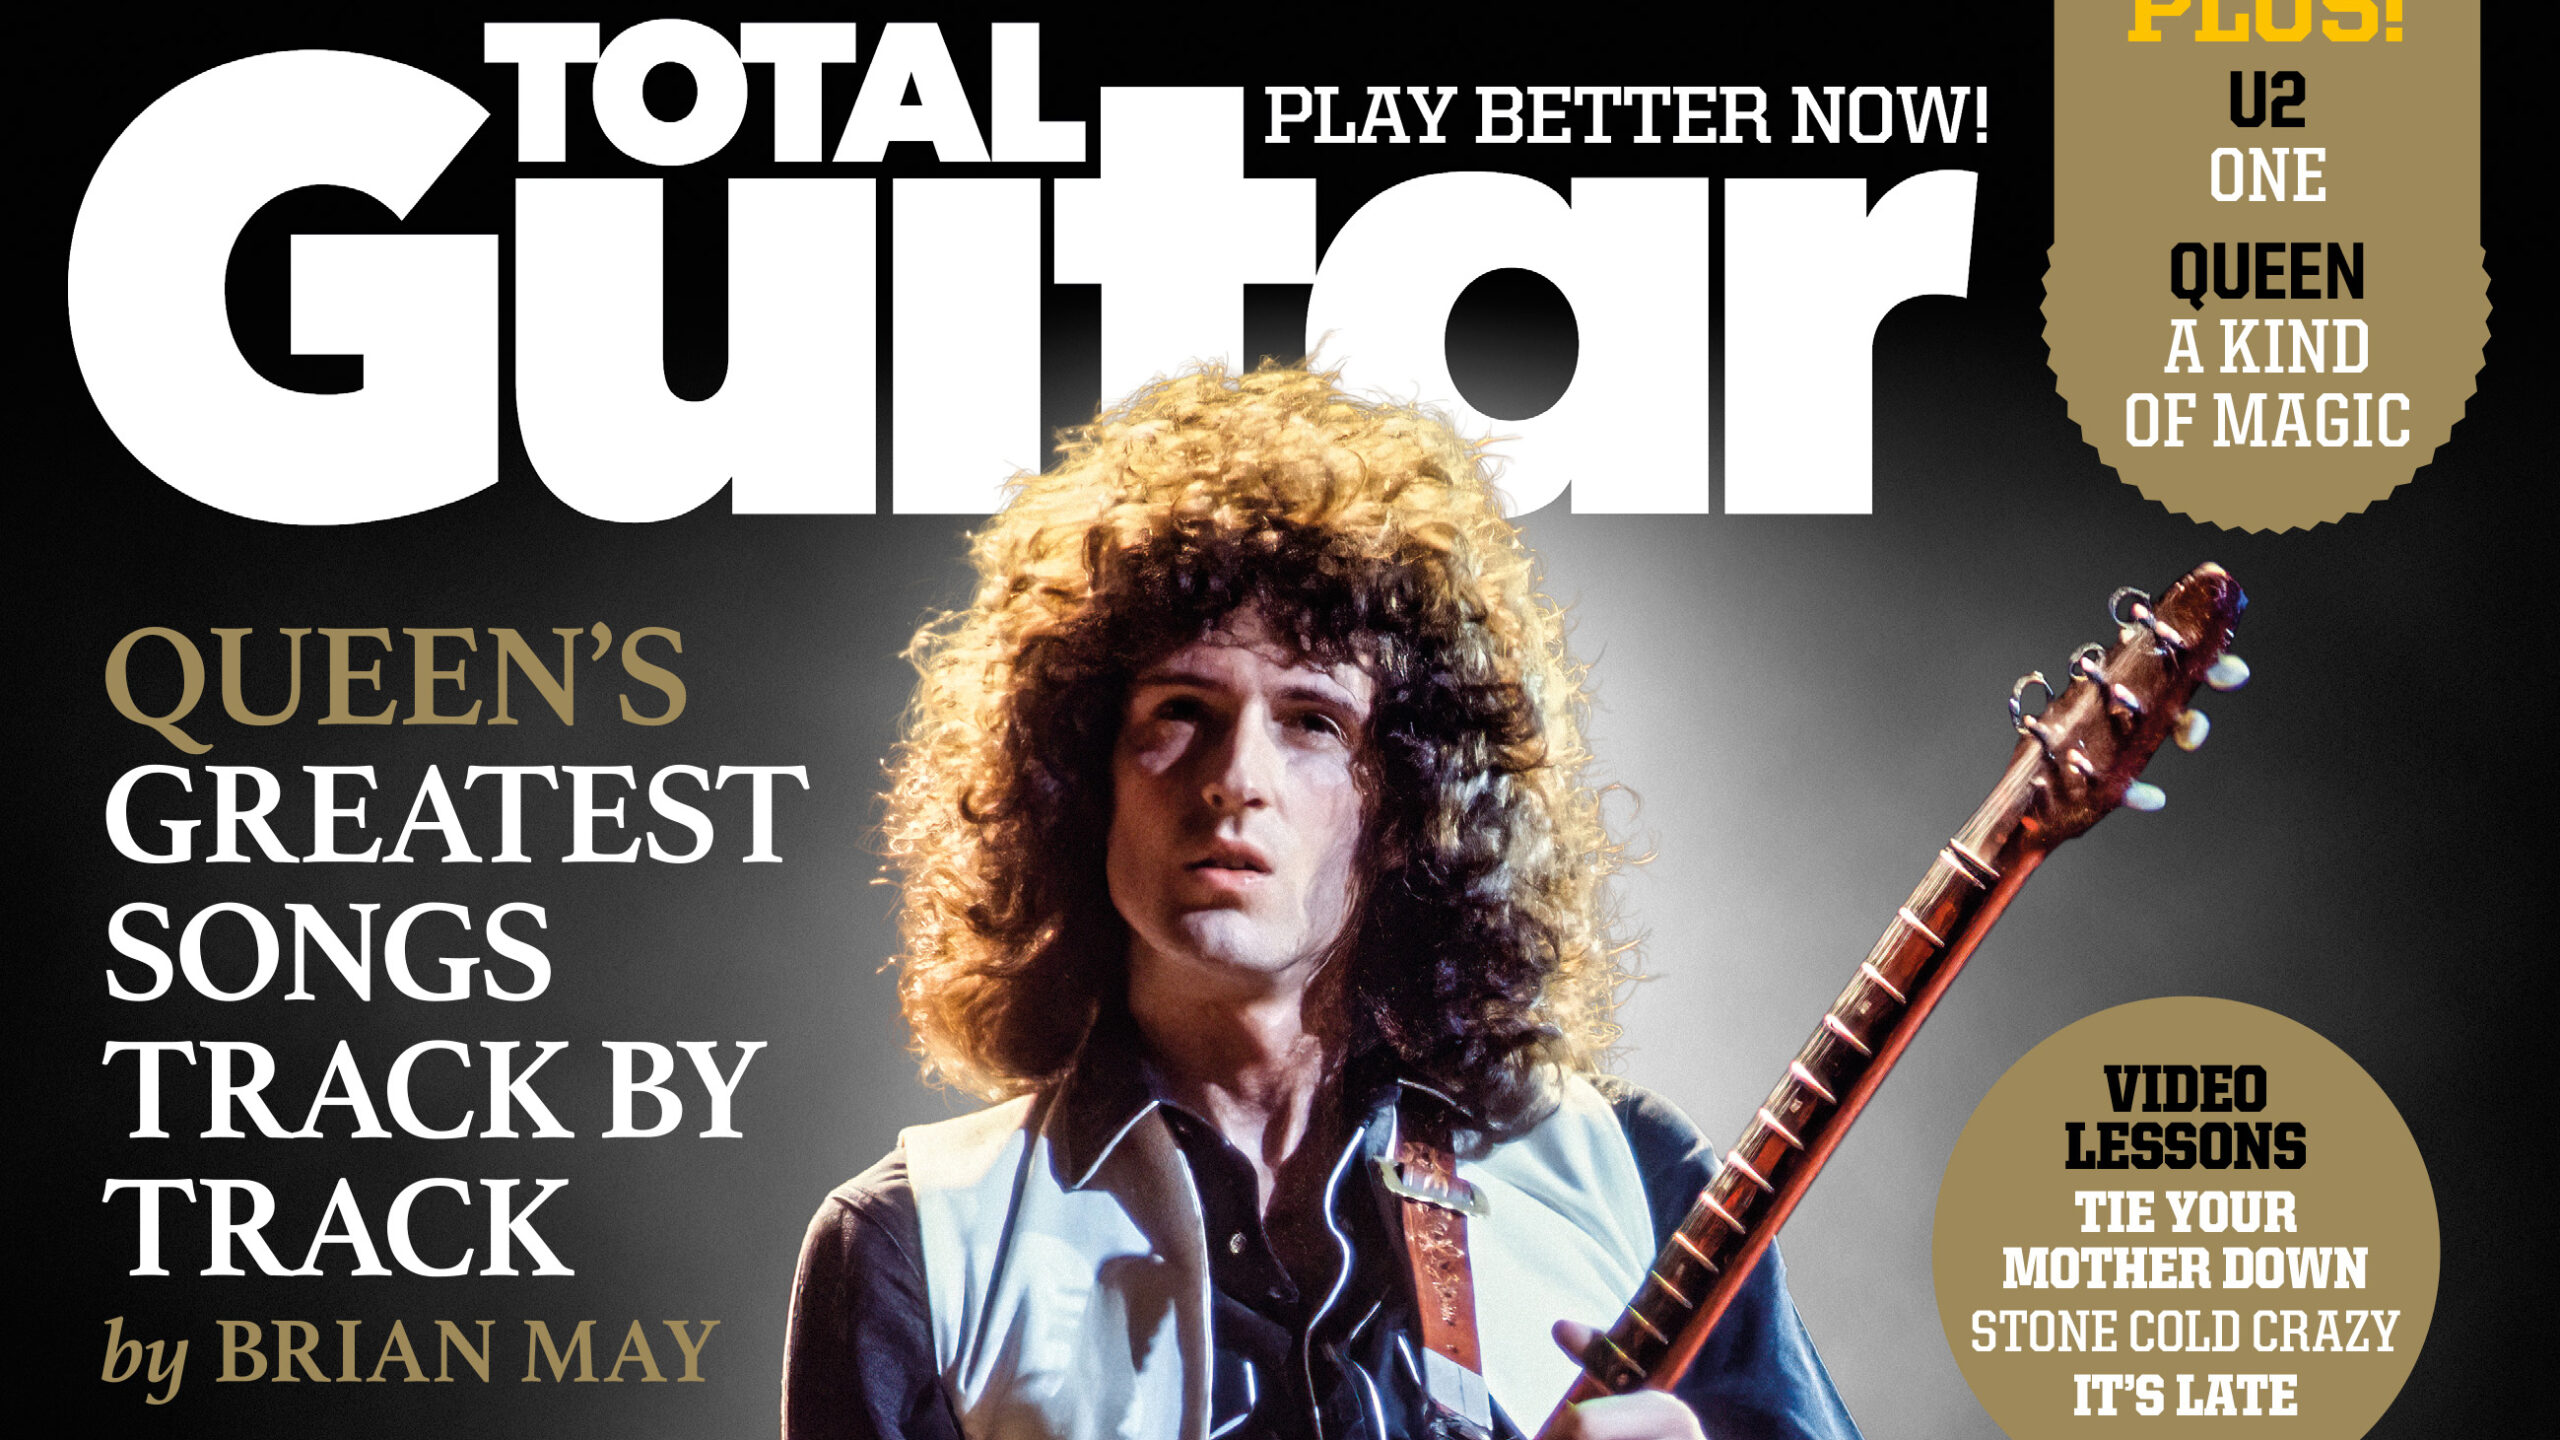 On sale now! Inside the new issue of Total Guitar: Queen’s Greatest Songs Track By Track – By Brian May